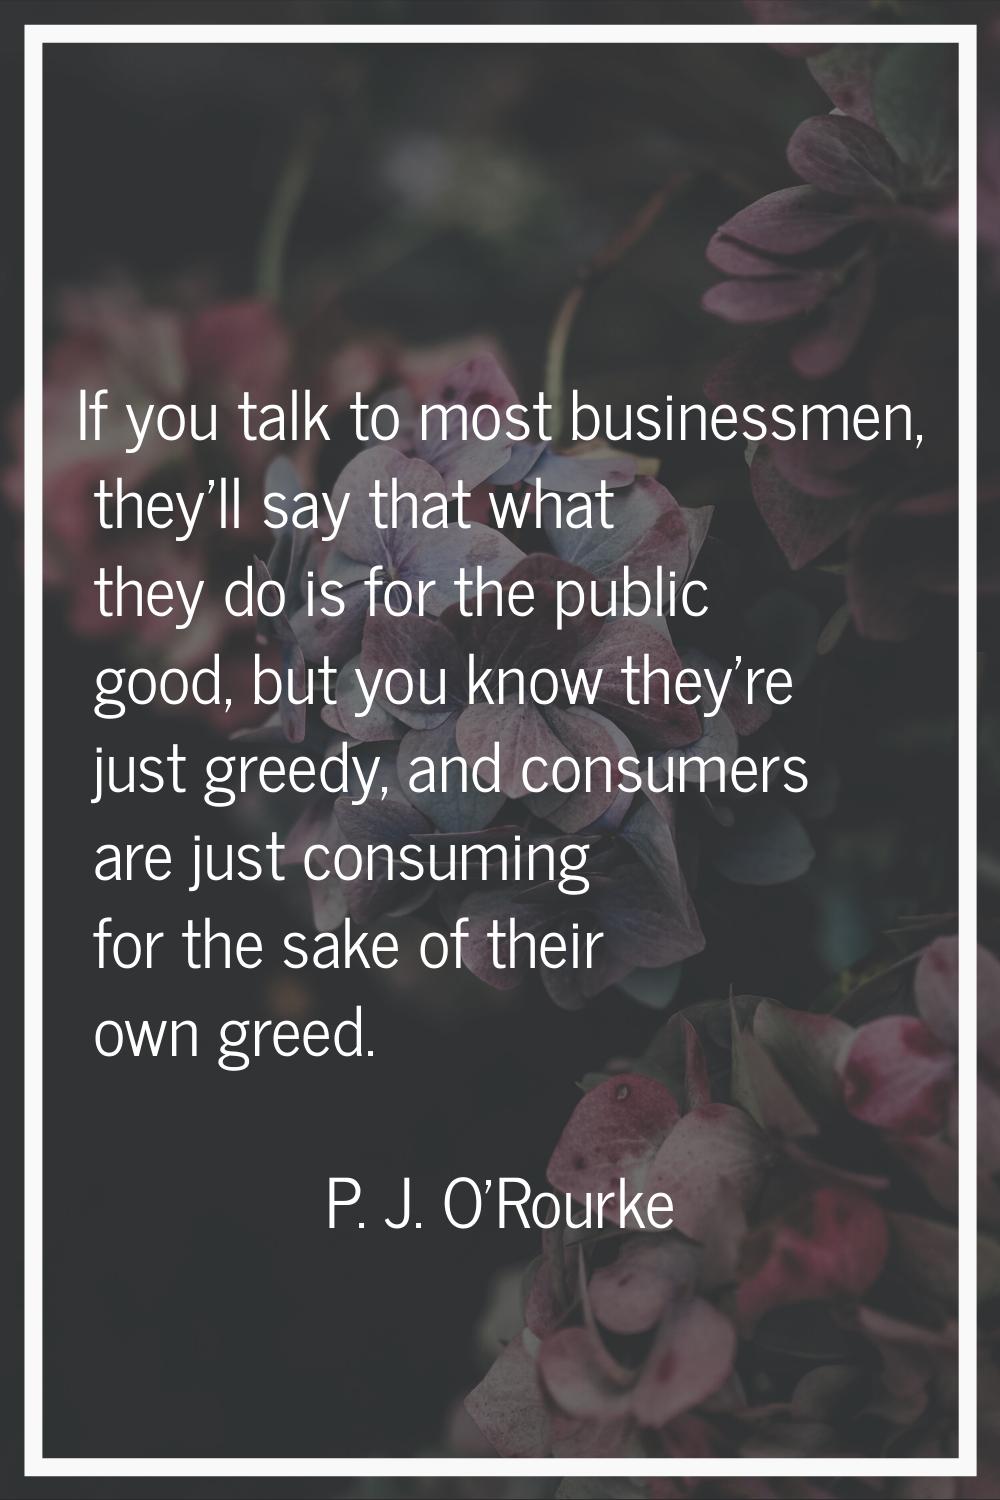 If you talk to most businessmen, they'll say that what they do is for the public good, but you know